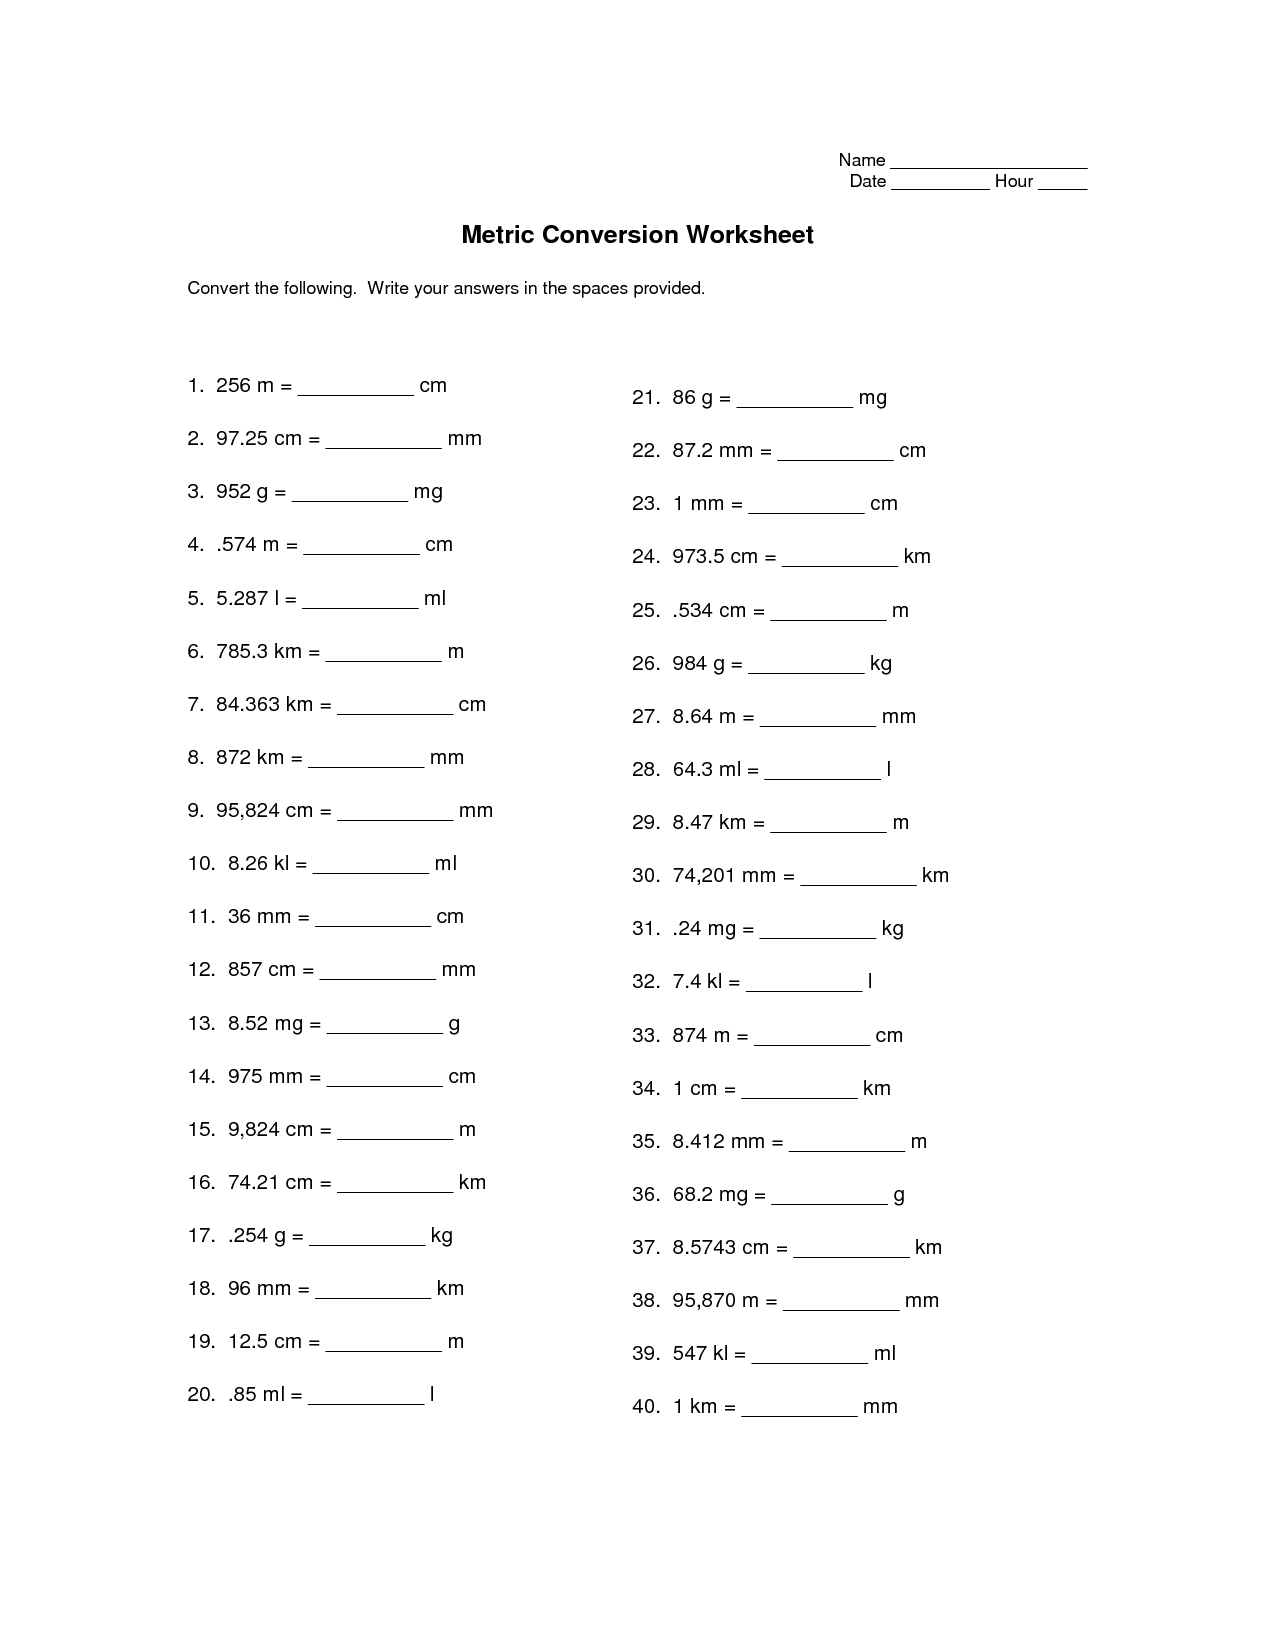 Metric Conversions Worksheet with Answers Image